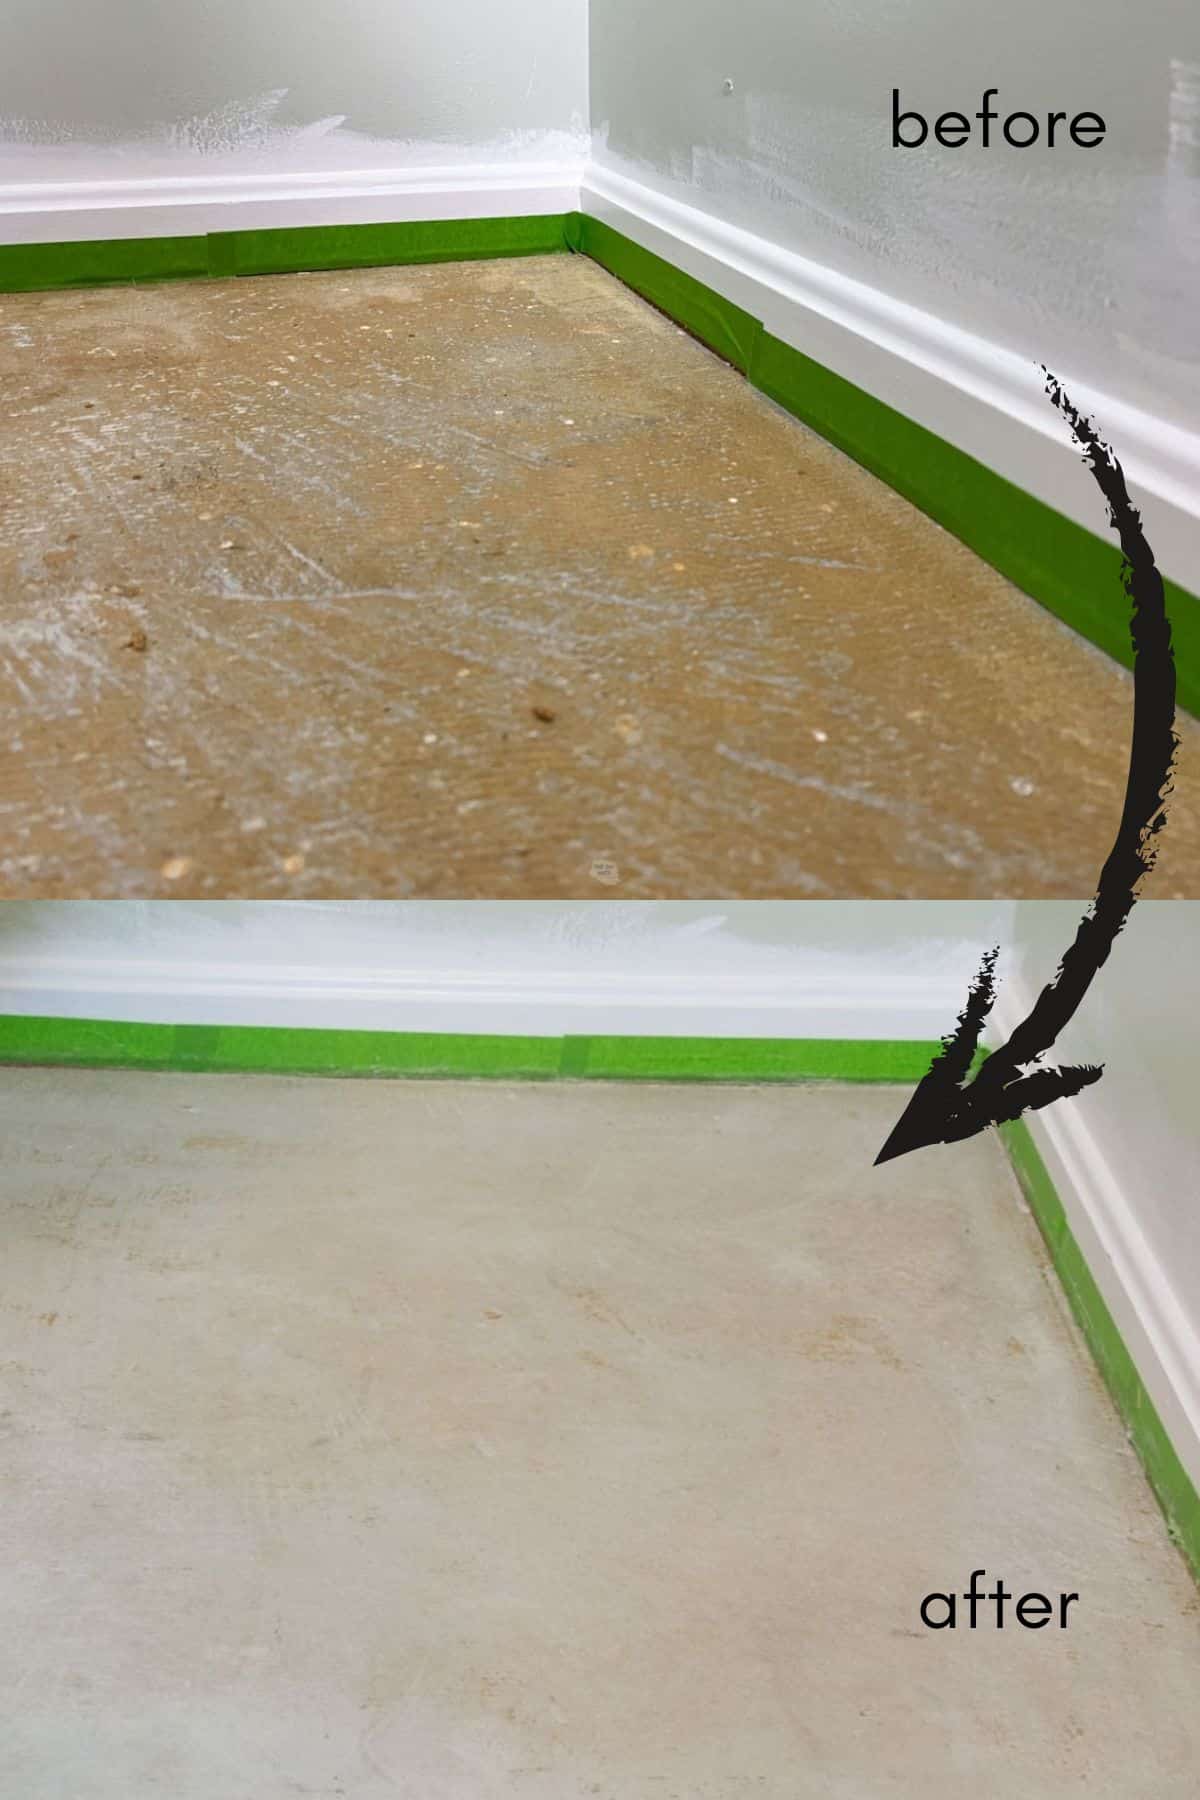 two images one before with carpet glue on concrete with molding and the other with arrow pointing to after with glue removed off of concrete.